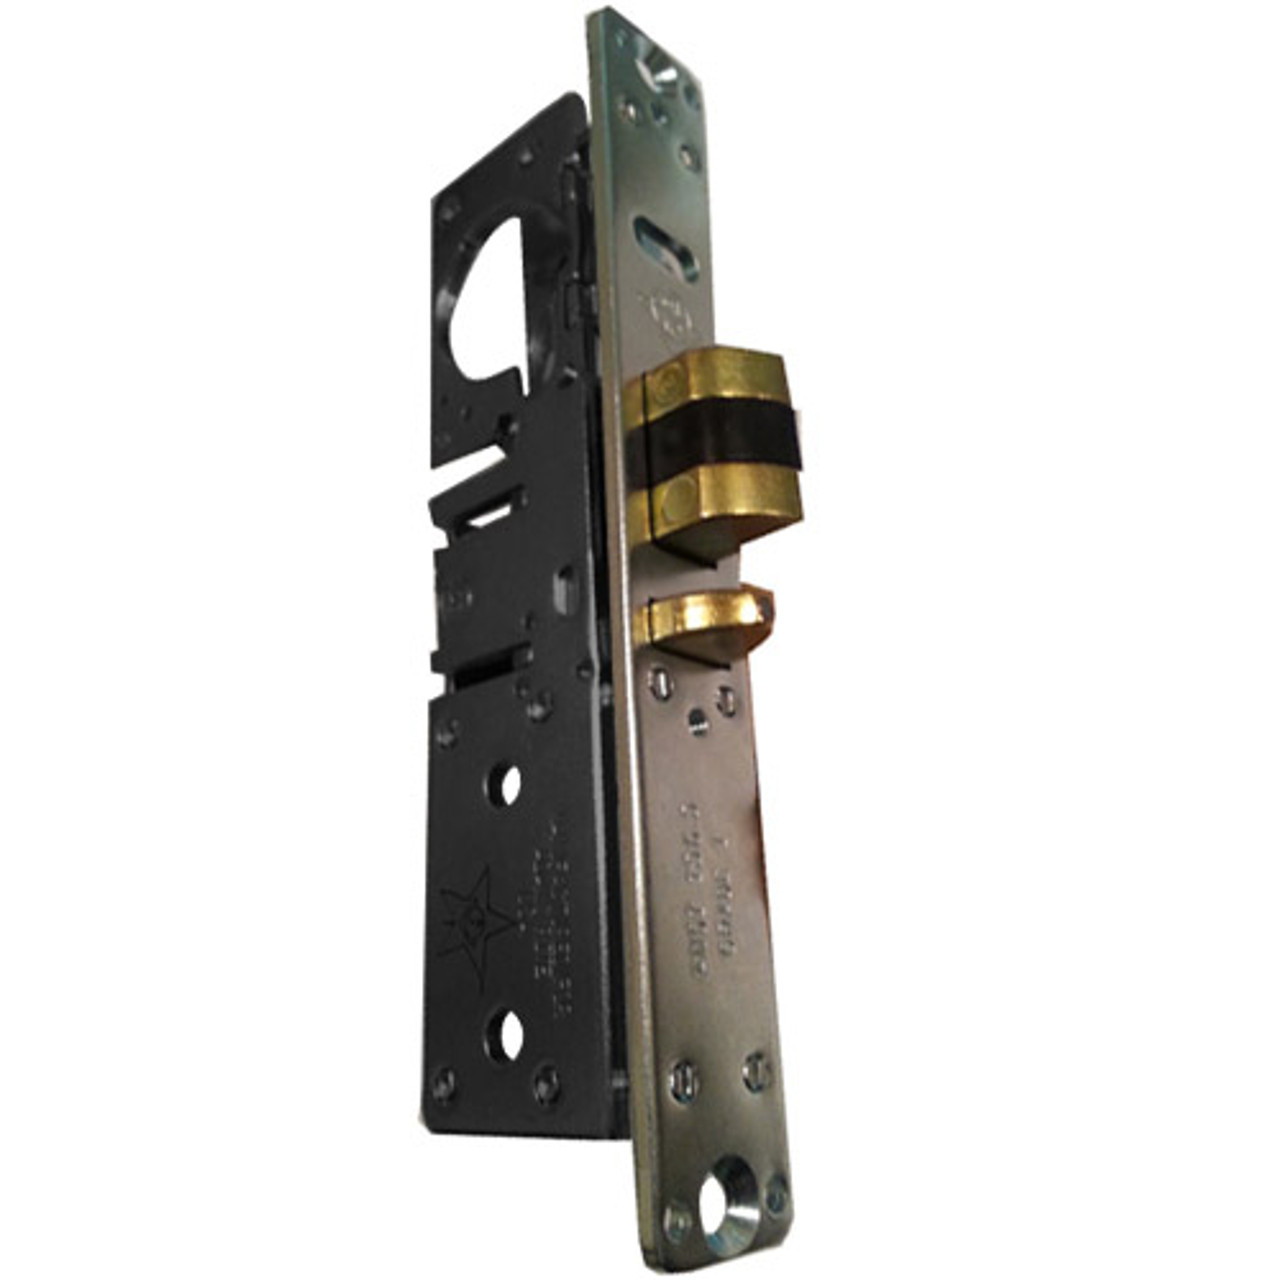 4511W-25-101-335 Adams Rite Standard Deadlatch with Radius Faceplate with weatherstrip in Black Anodized Finish